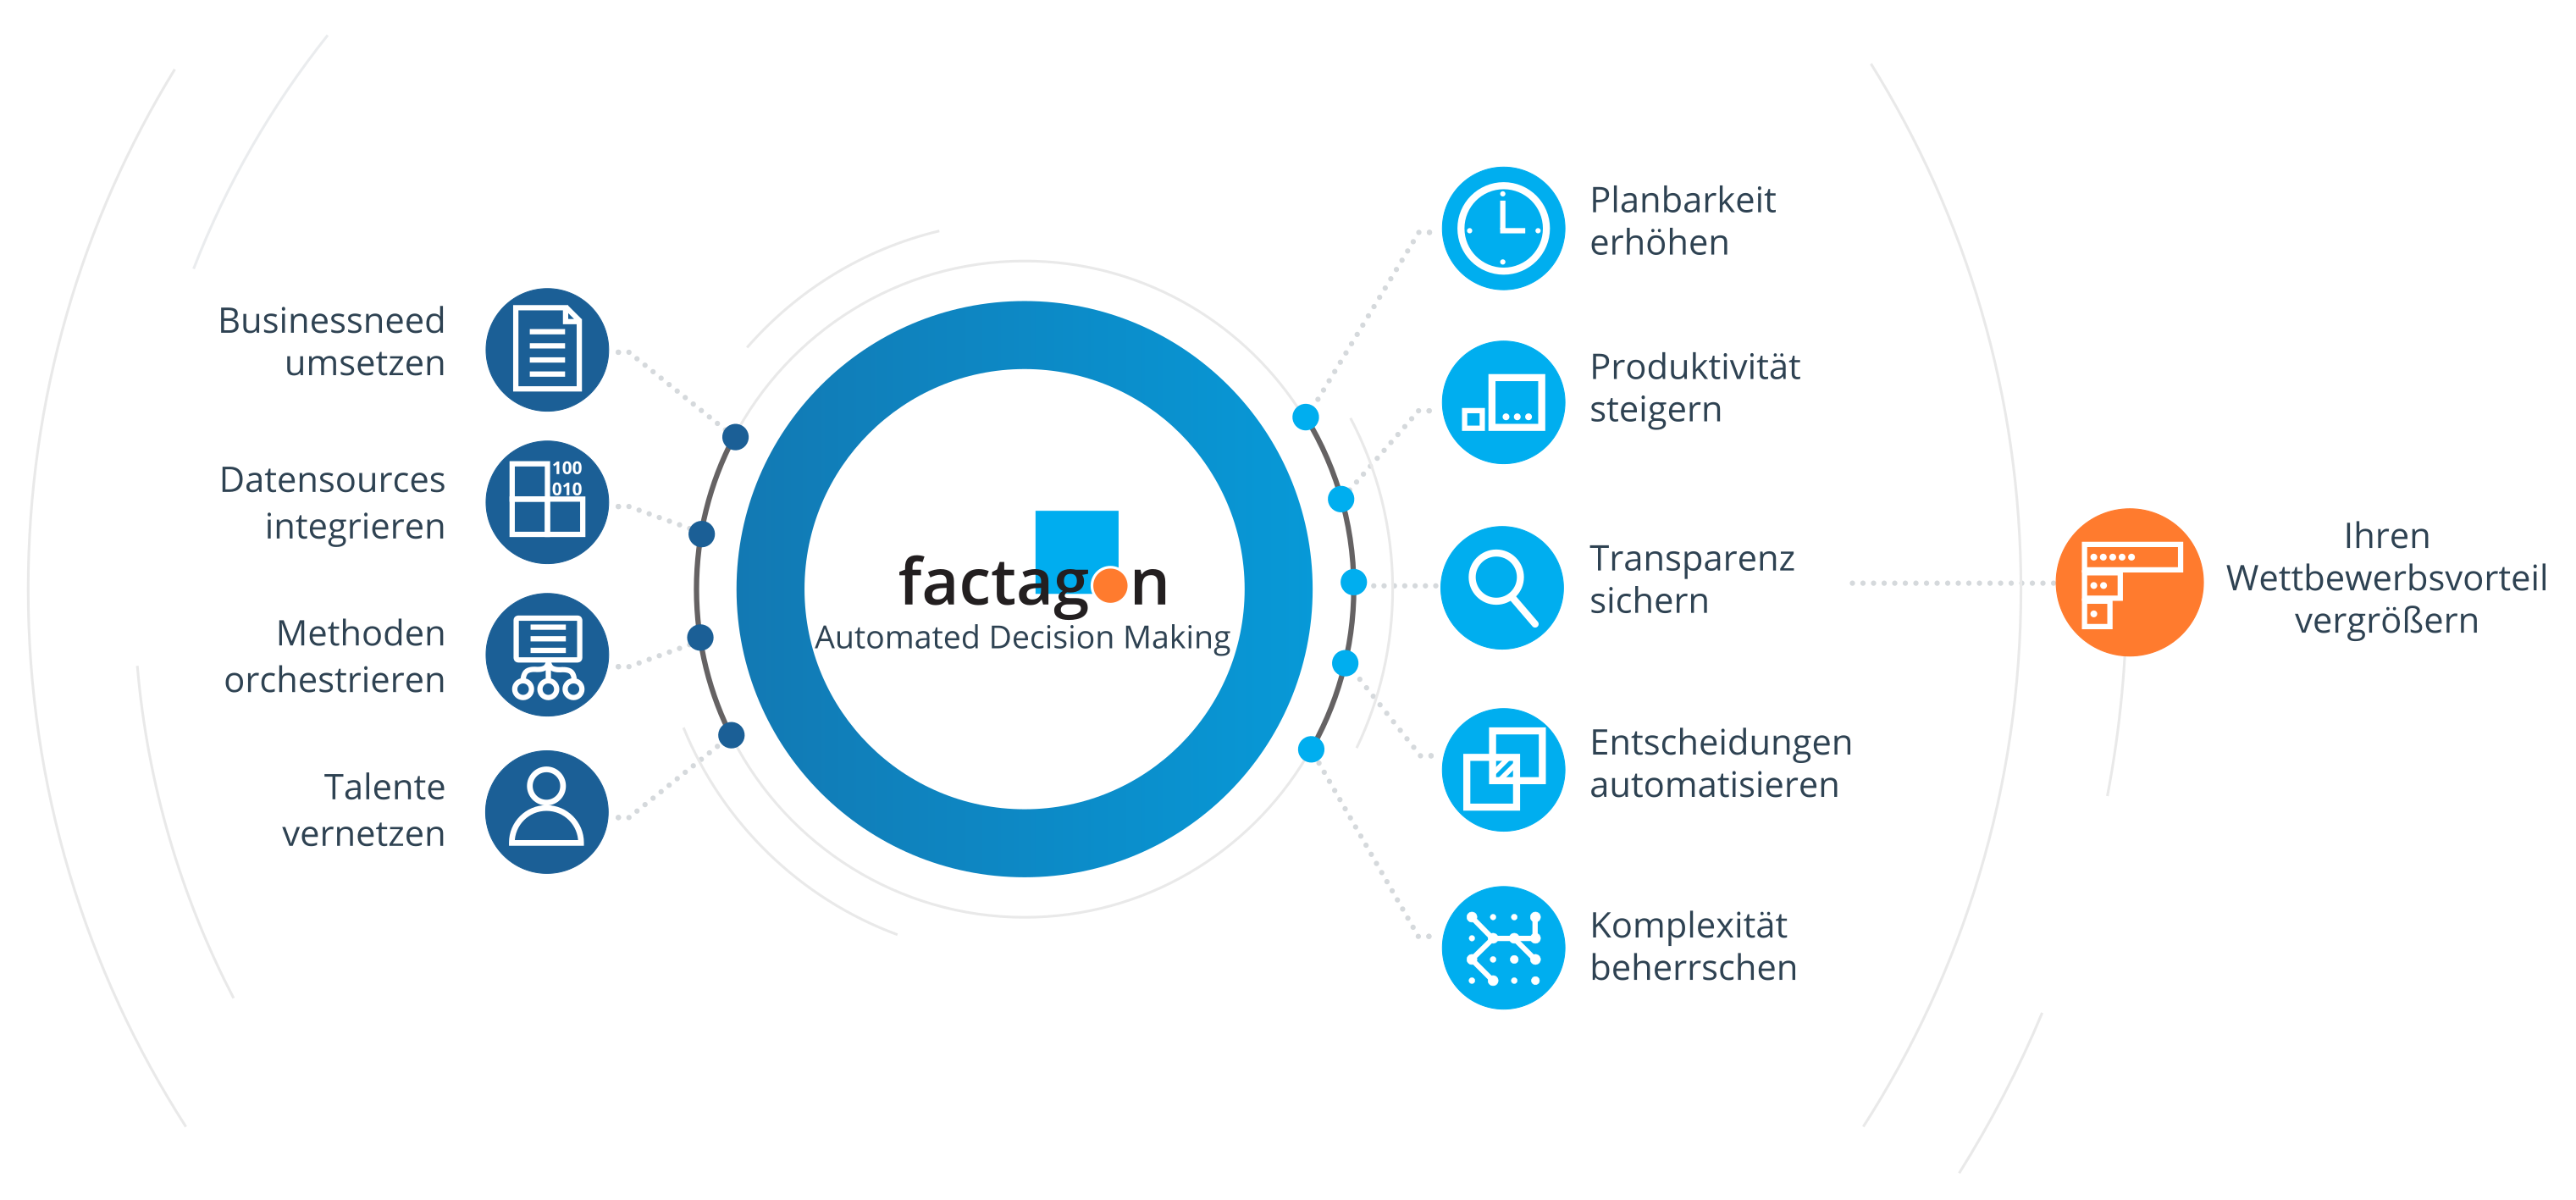 factagon Automated-Decision-Making